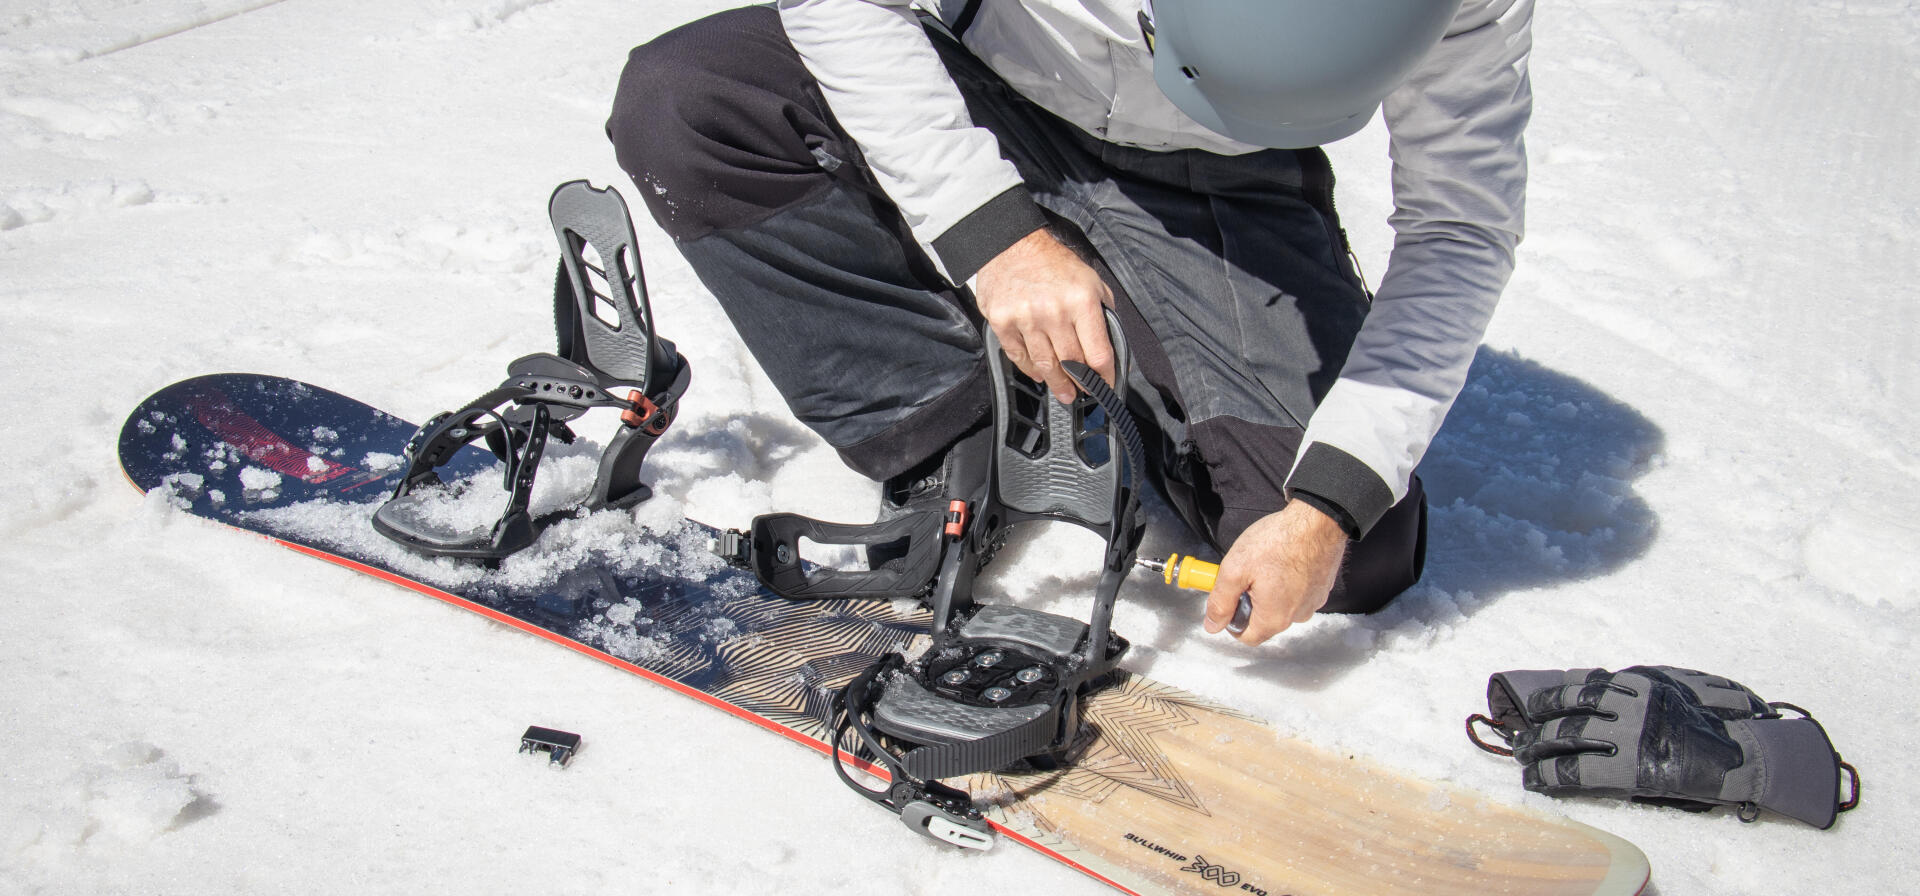 Laag materiaal achtergrond How to adjust your snowboard bindings?